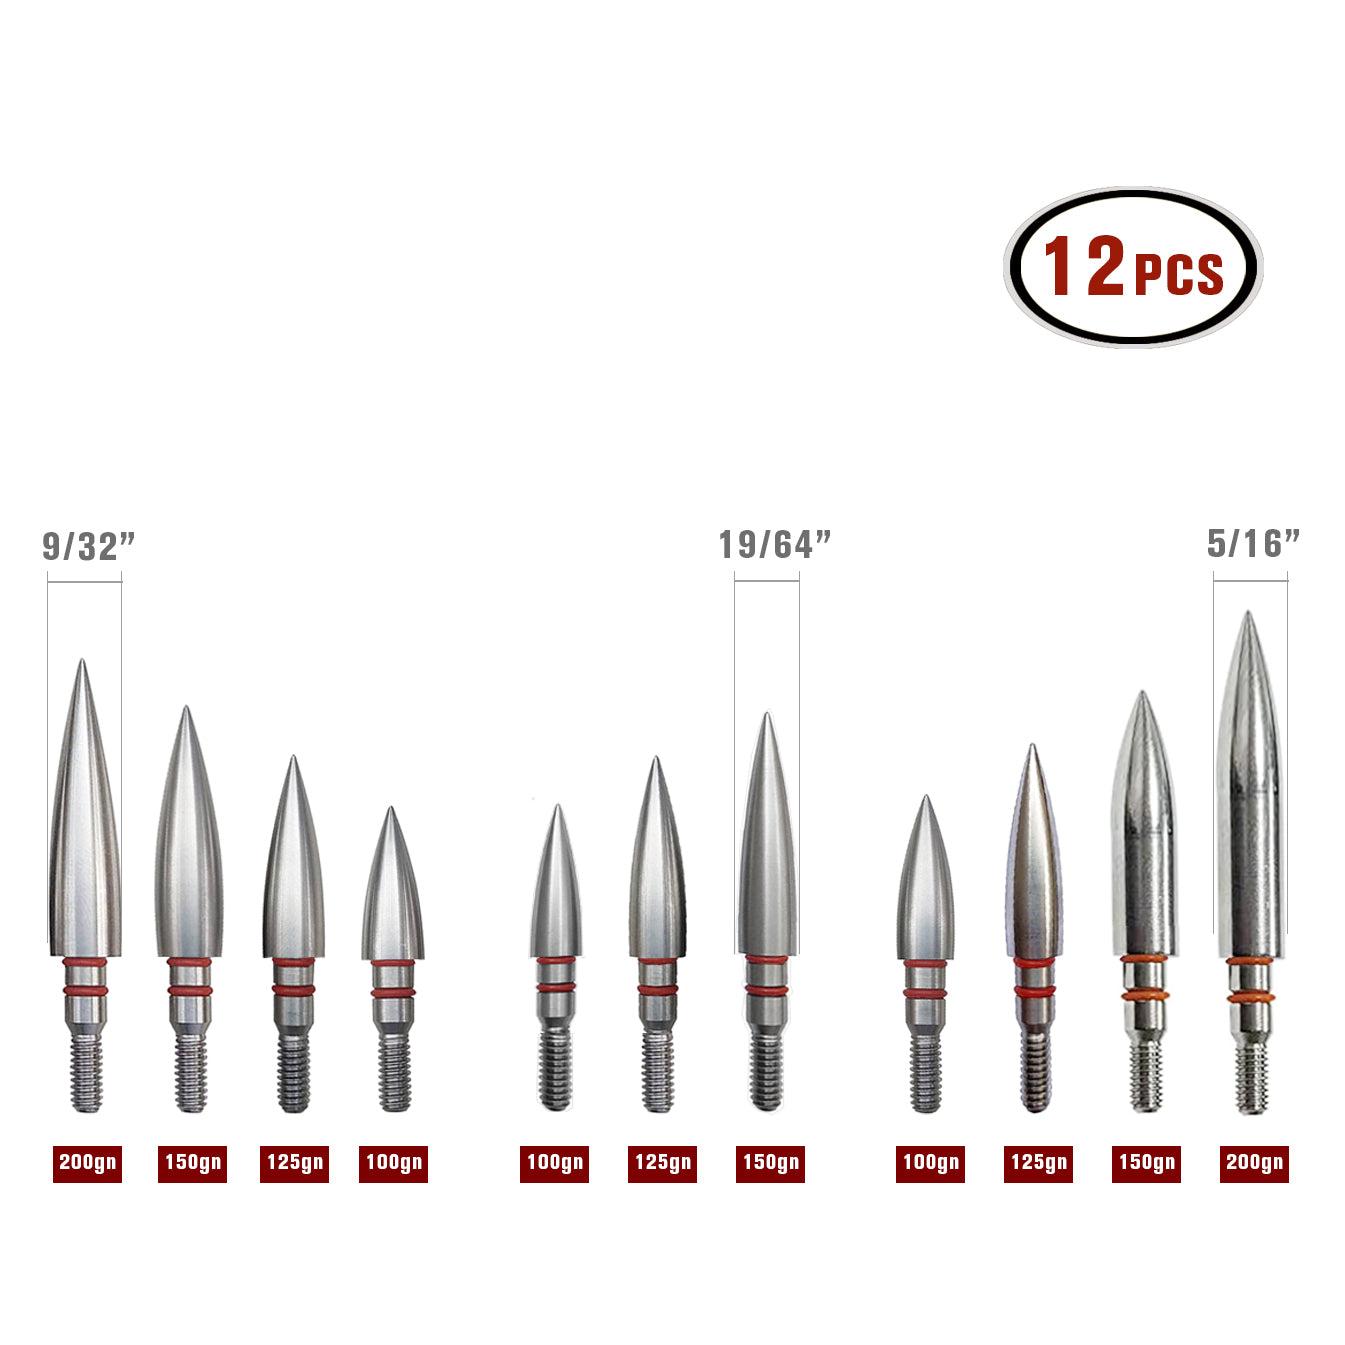 Product Stainless Steel Bullet Points 9/32 19/64 5/16 100-200Gr - topointarchery image